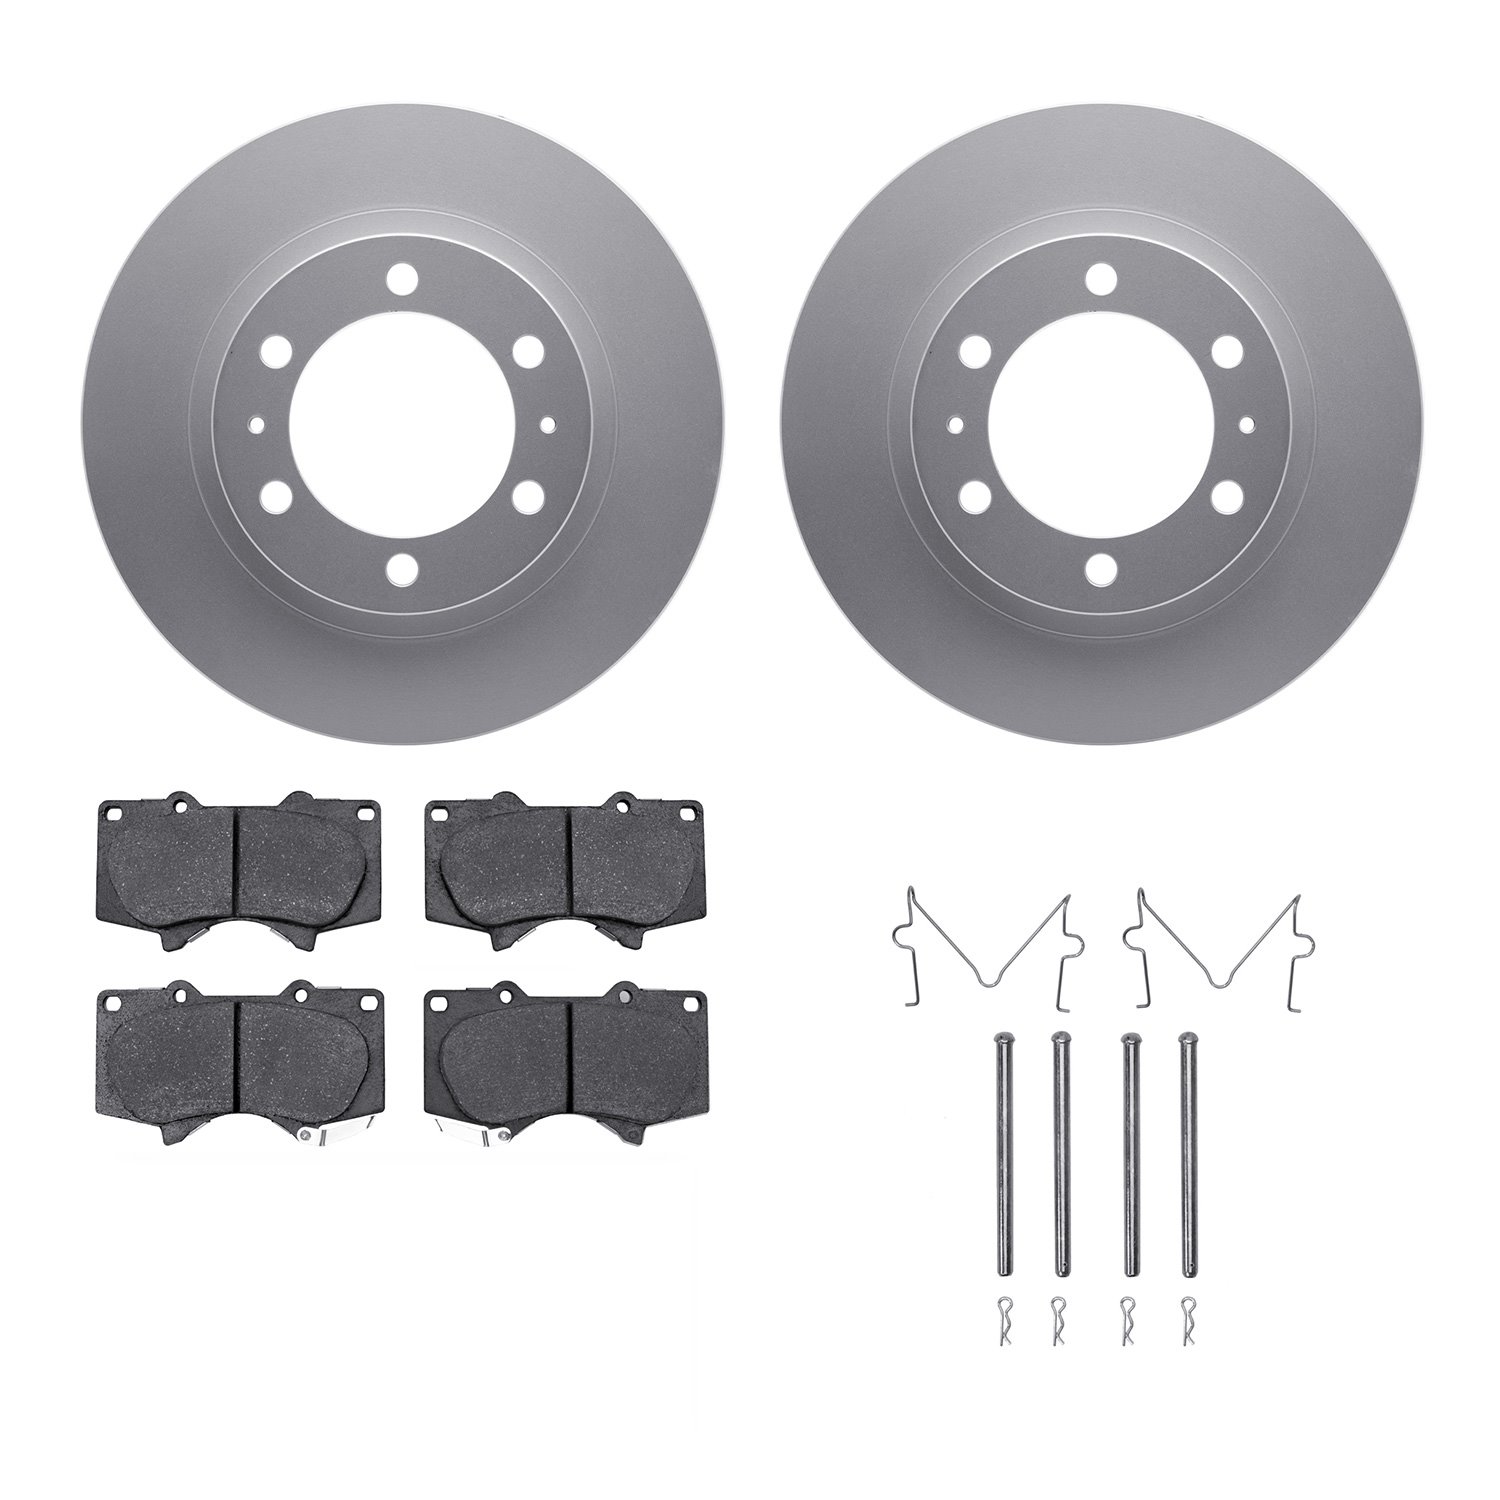 4312-76057 Geospec Brake Rotors with 3000-Series Ceramic Brake Pads & Hardware, Fits Select Lexus/Toyota/Scion, Position: Front